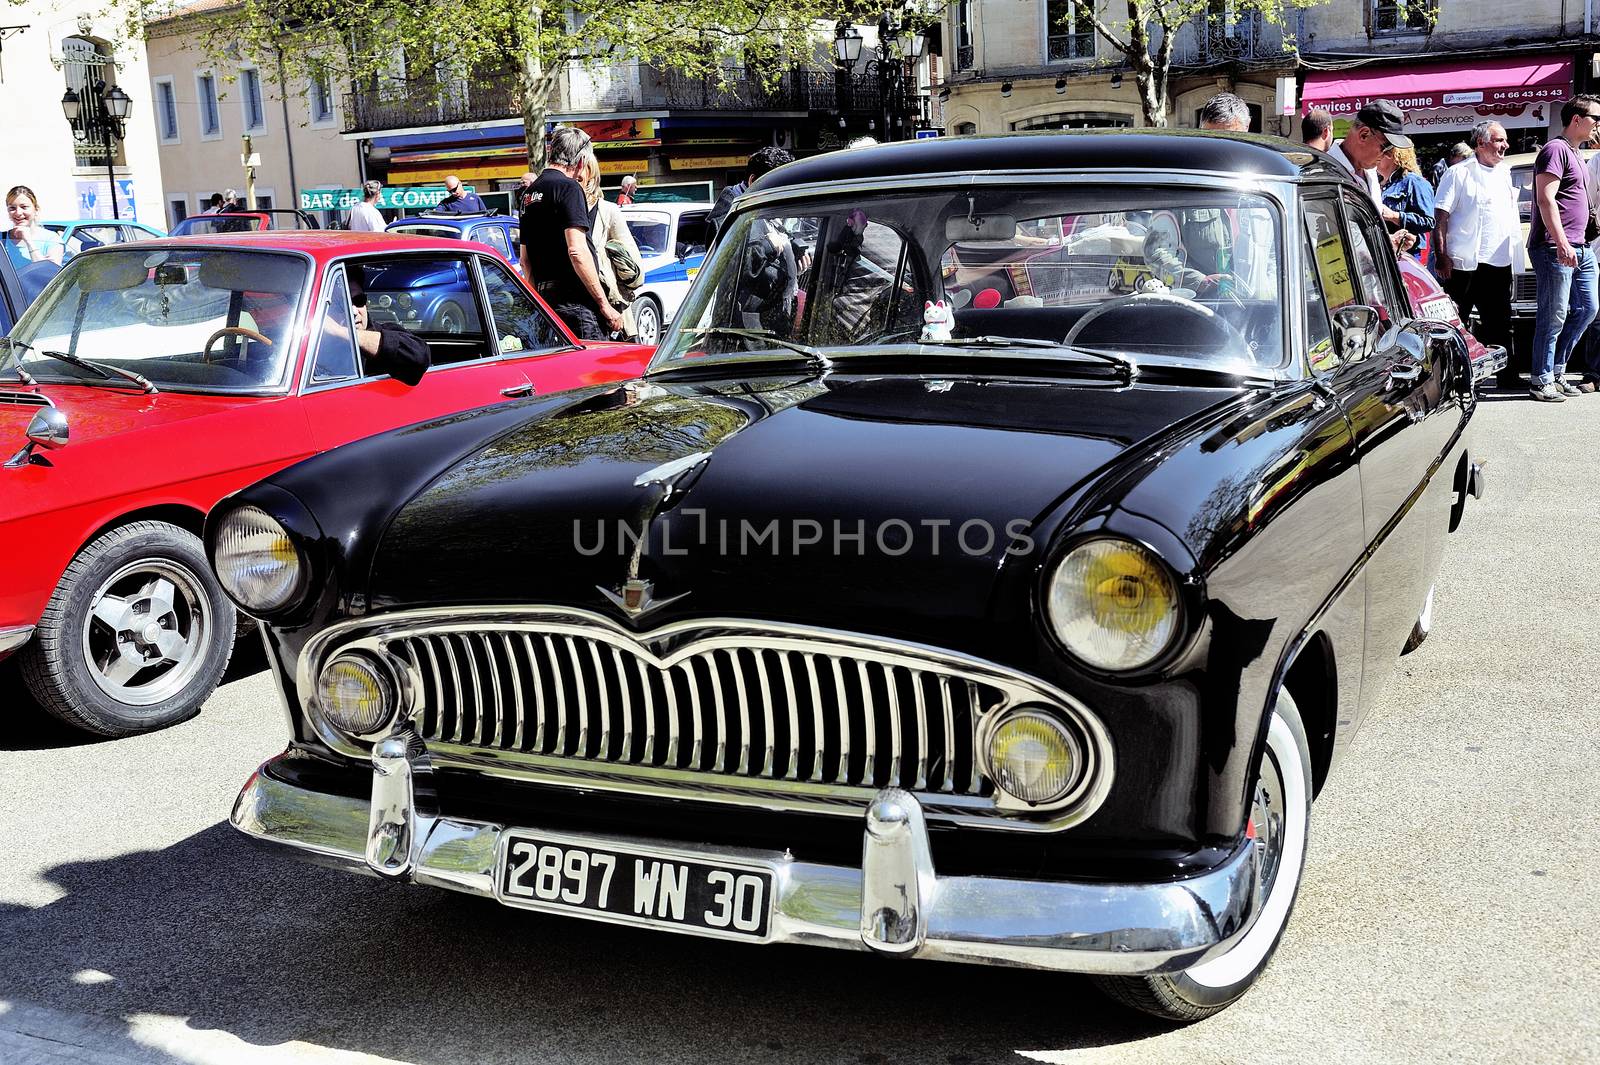 Simca Chambord black manufactured between 1958 and 1961 photographed vintage car rally in the square of the Town Hall of the city of Ales